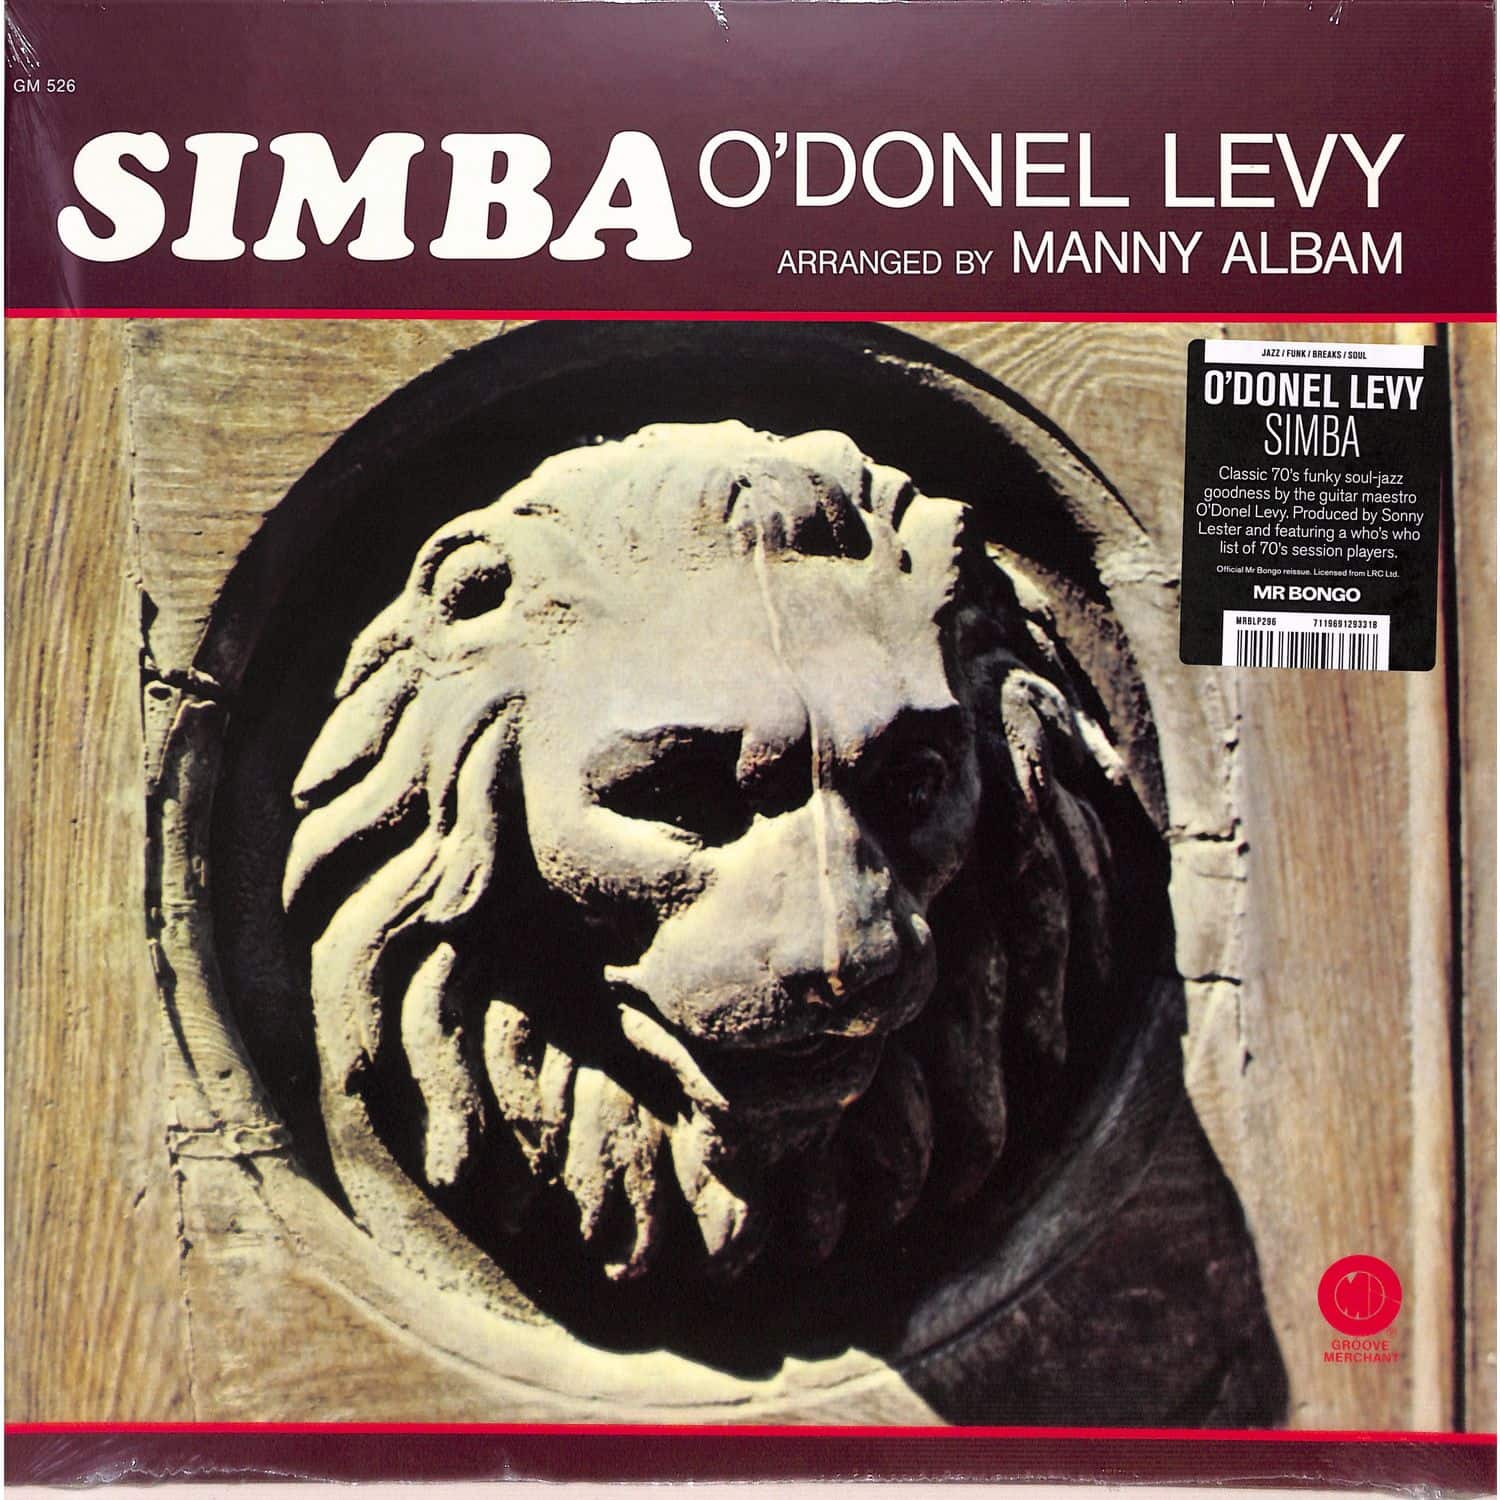 O donel Levy - SIMBA 